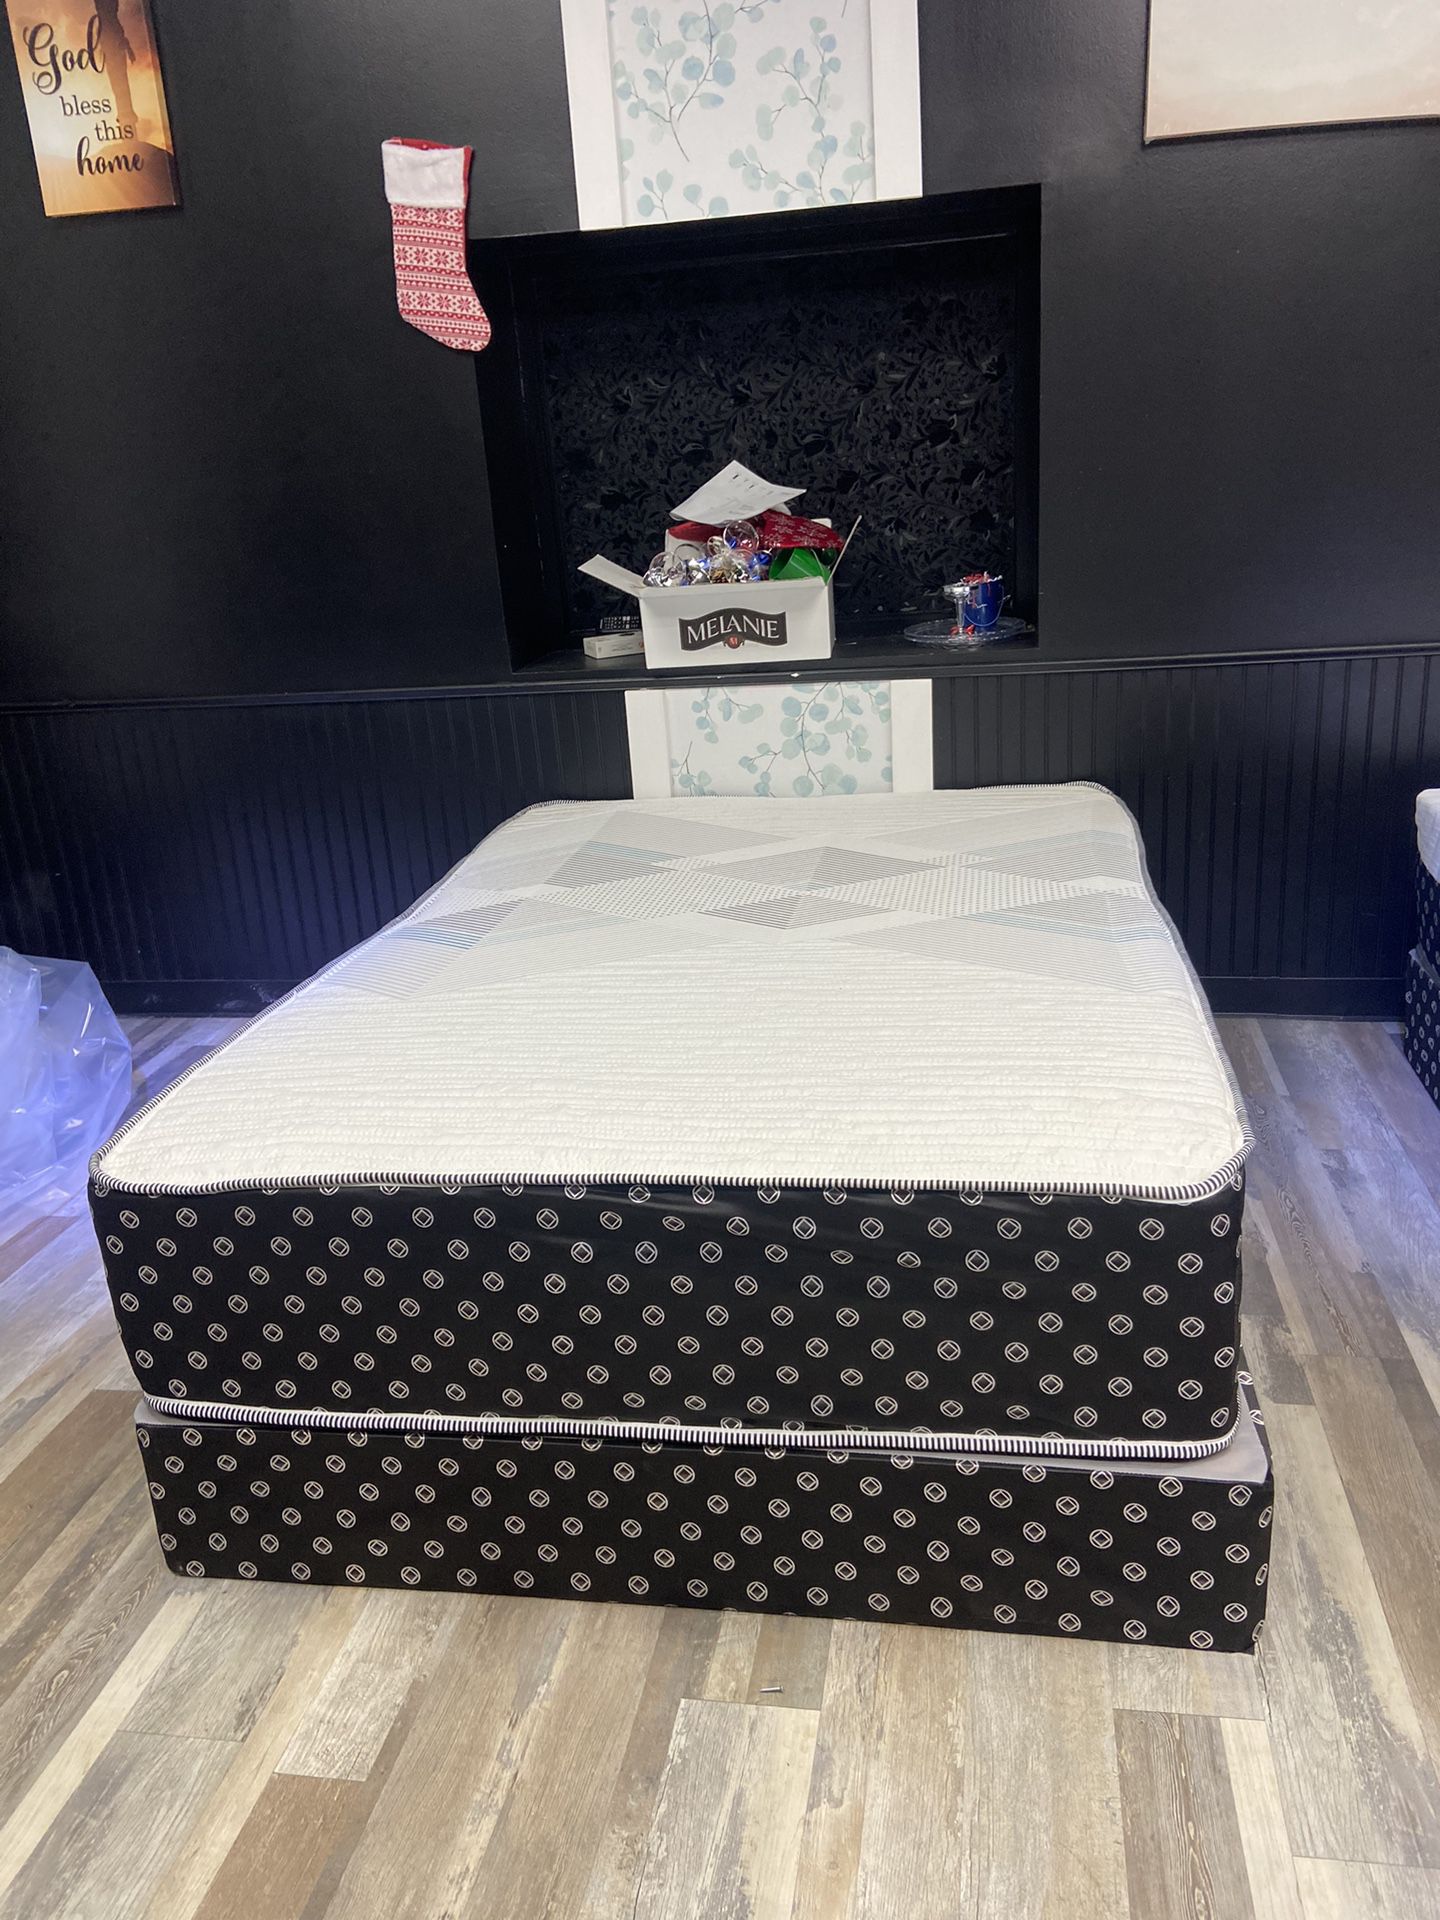 Queen Mattress Come With Free Box Spring - Free Delivery 🚚 Today To Reasonable Distance